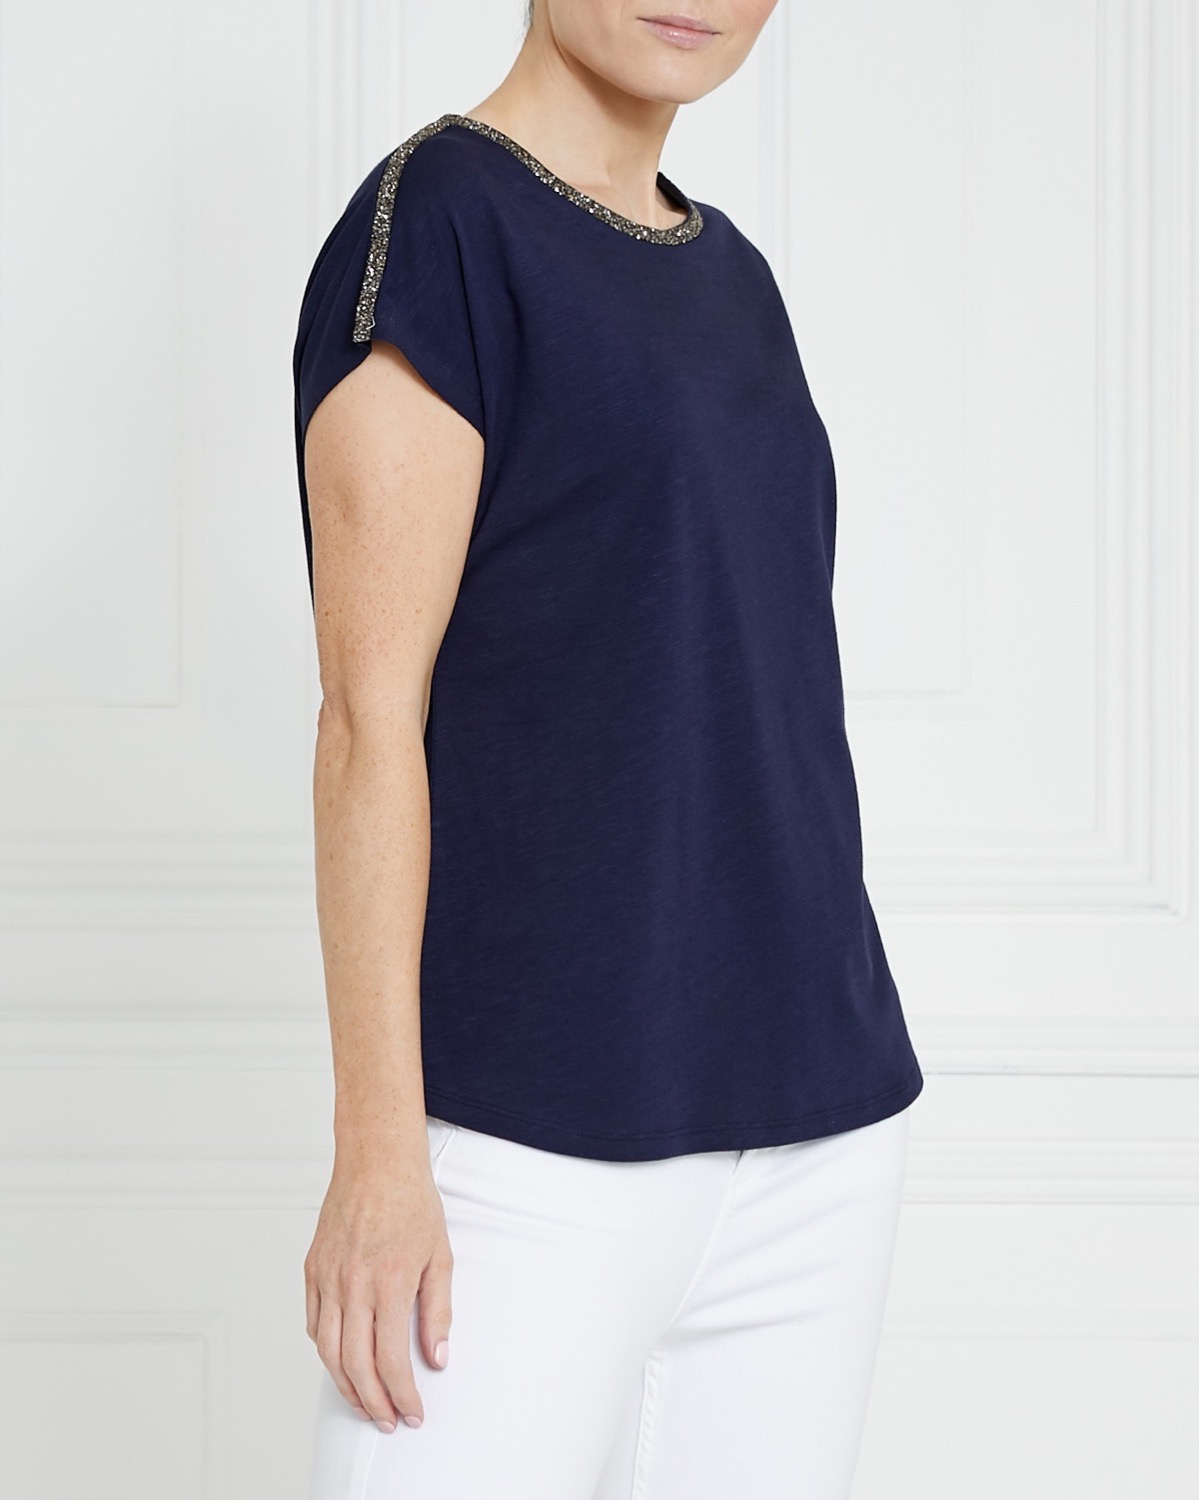 Gallery Embellished Cotton Modal T-Shirt